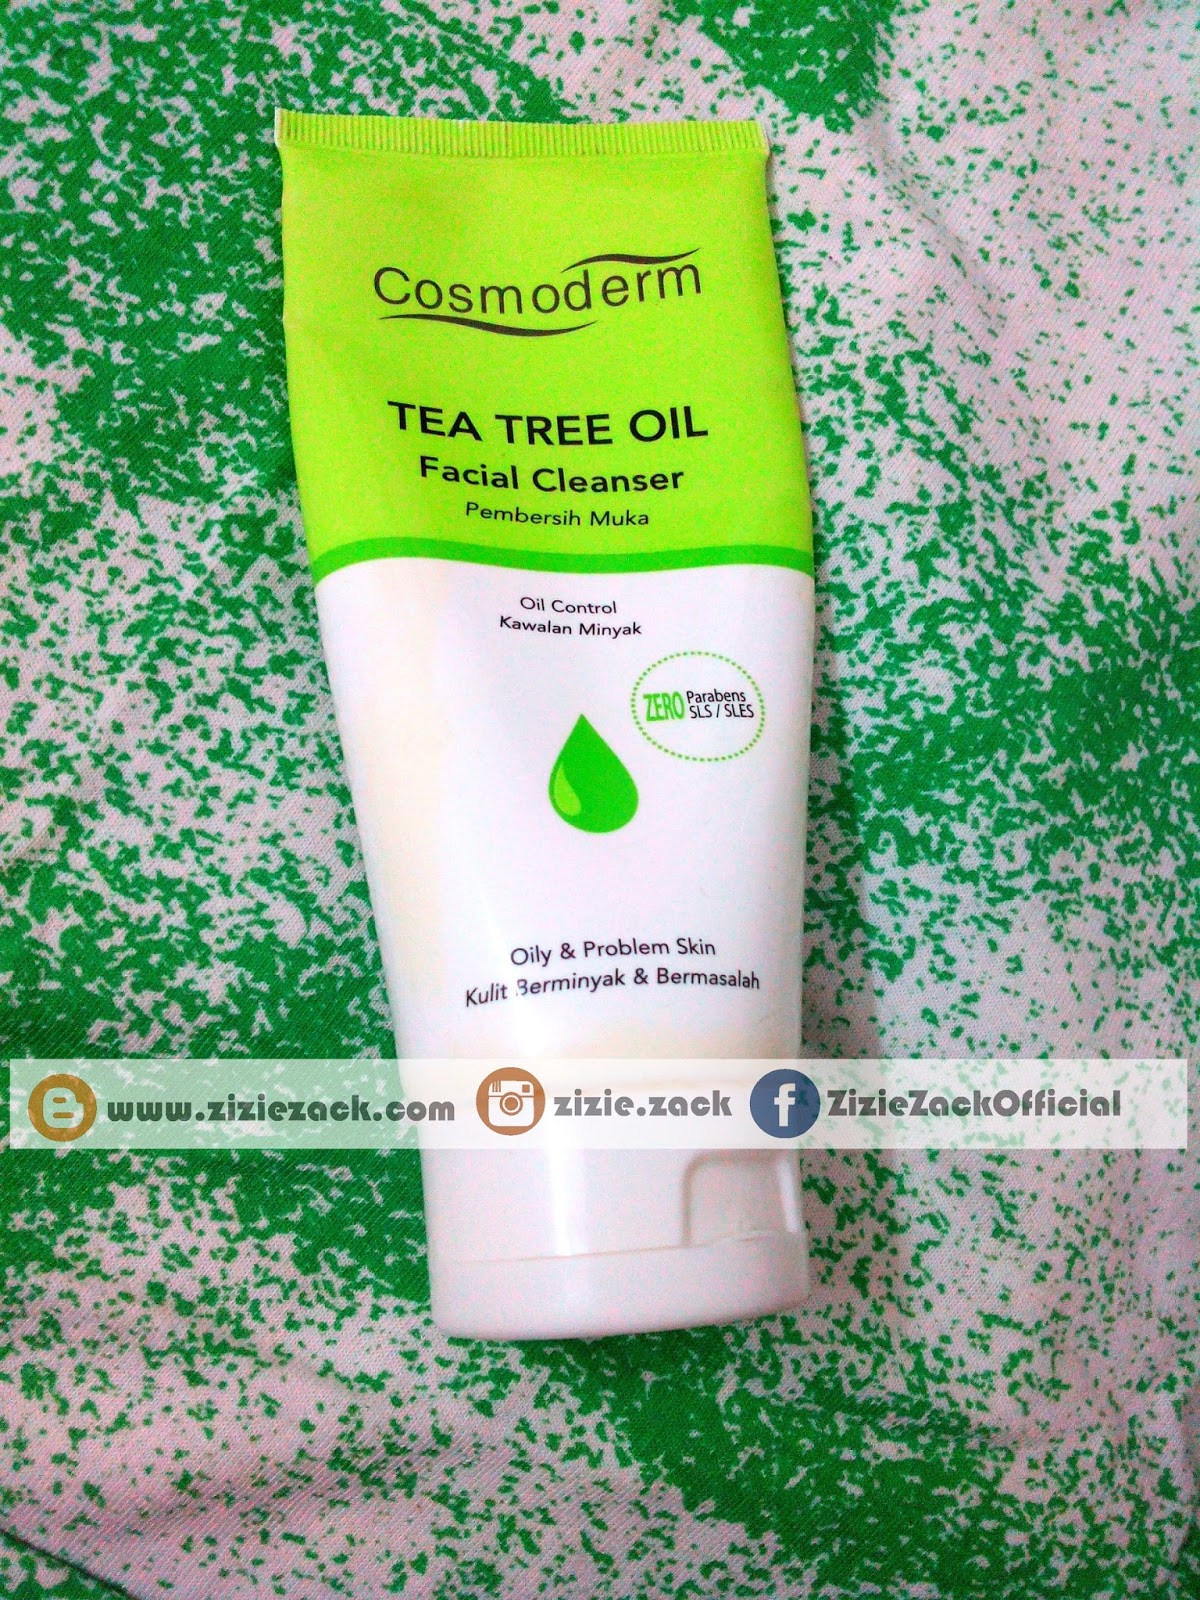 Review Tea Tree Oil Facial Cleanser Cosmoderm